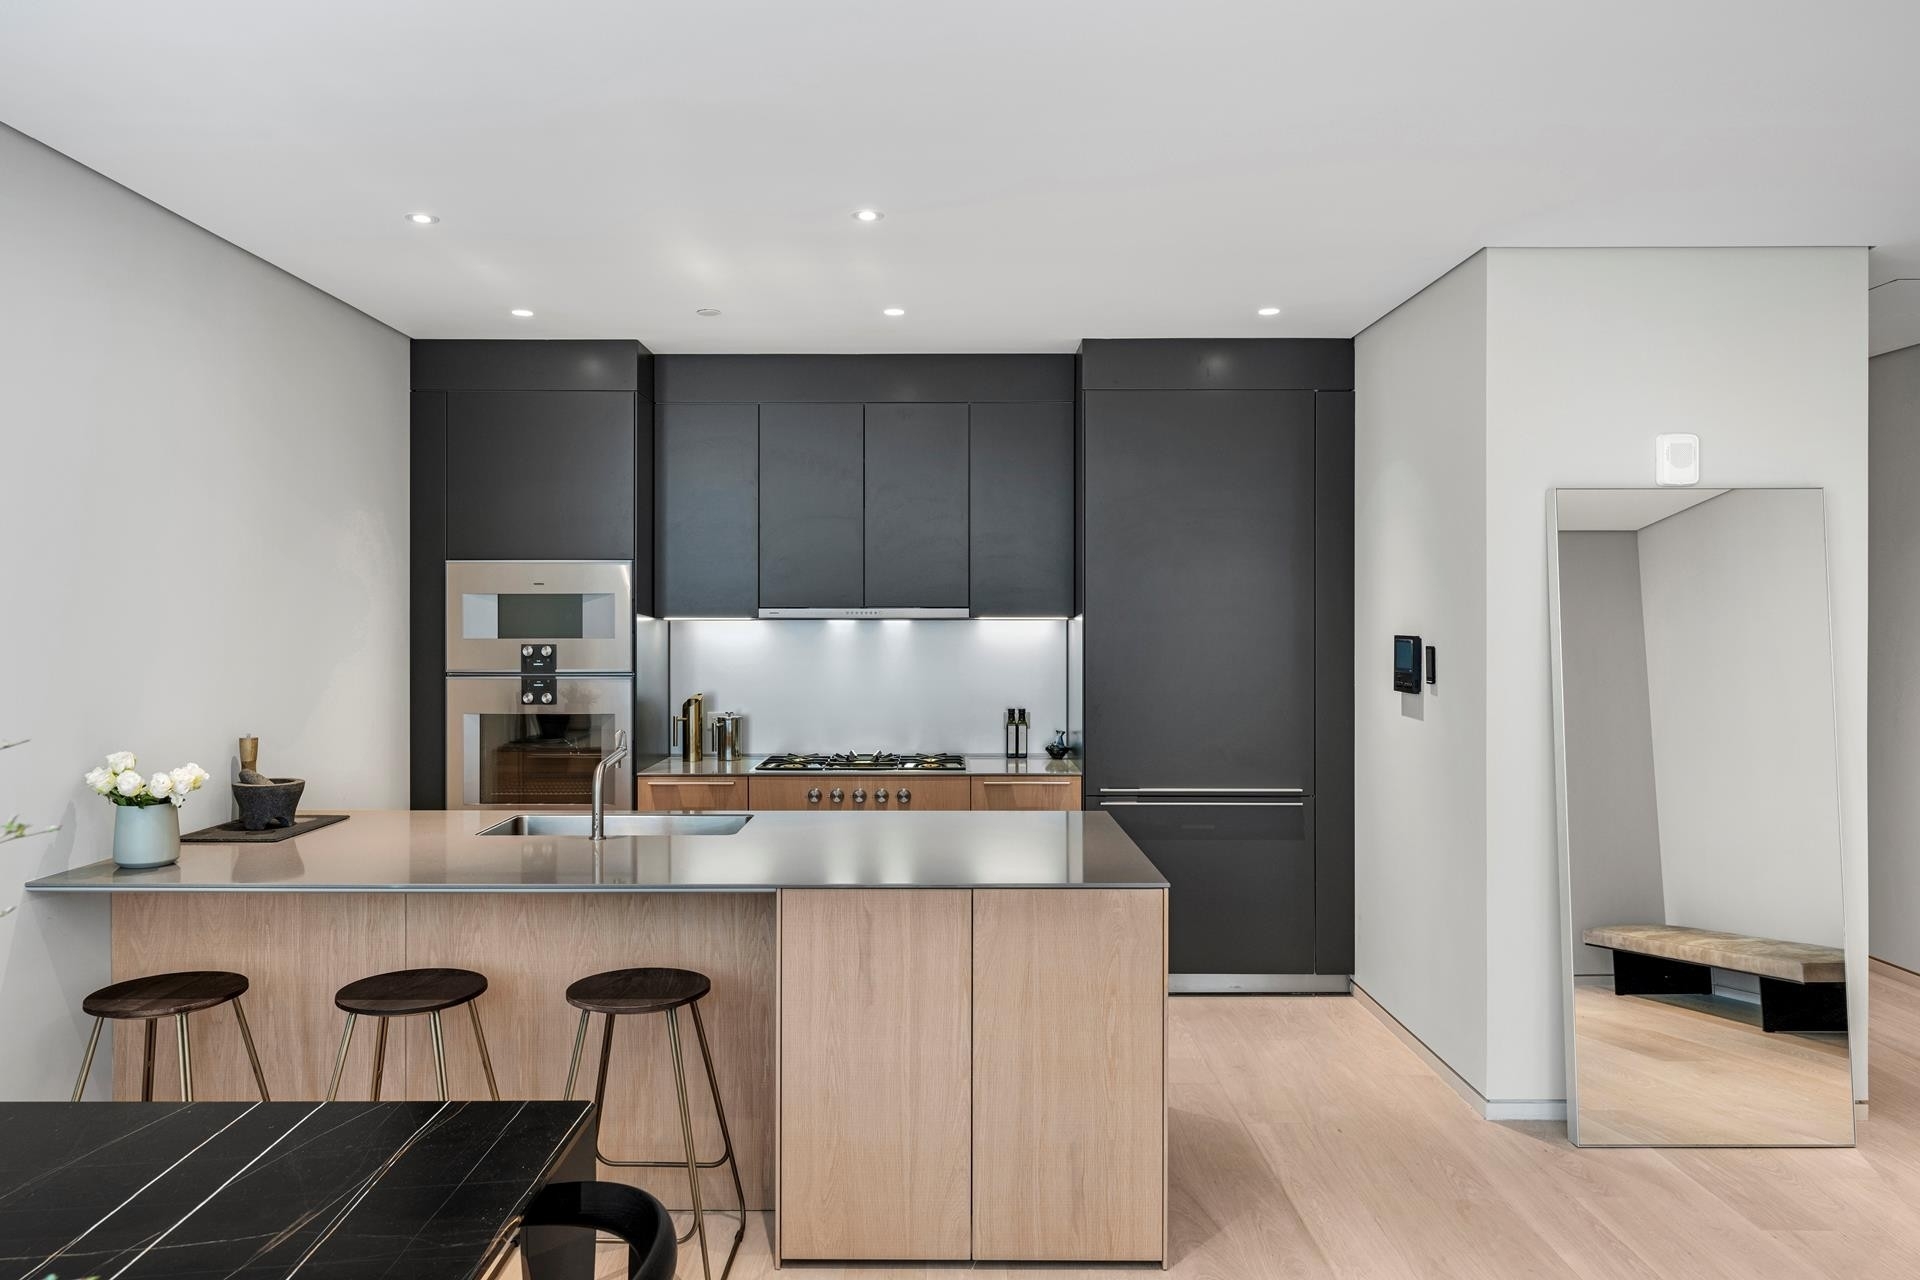 Condominium for Sale at Five One Five, 515 W 29TH ST, 2N Hudson Yards, New York, New York 10001